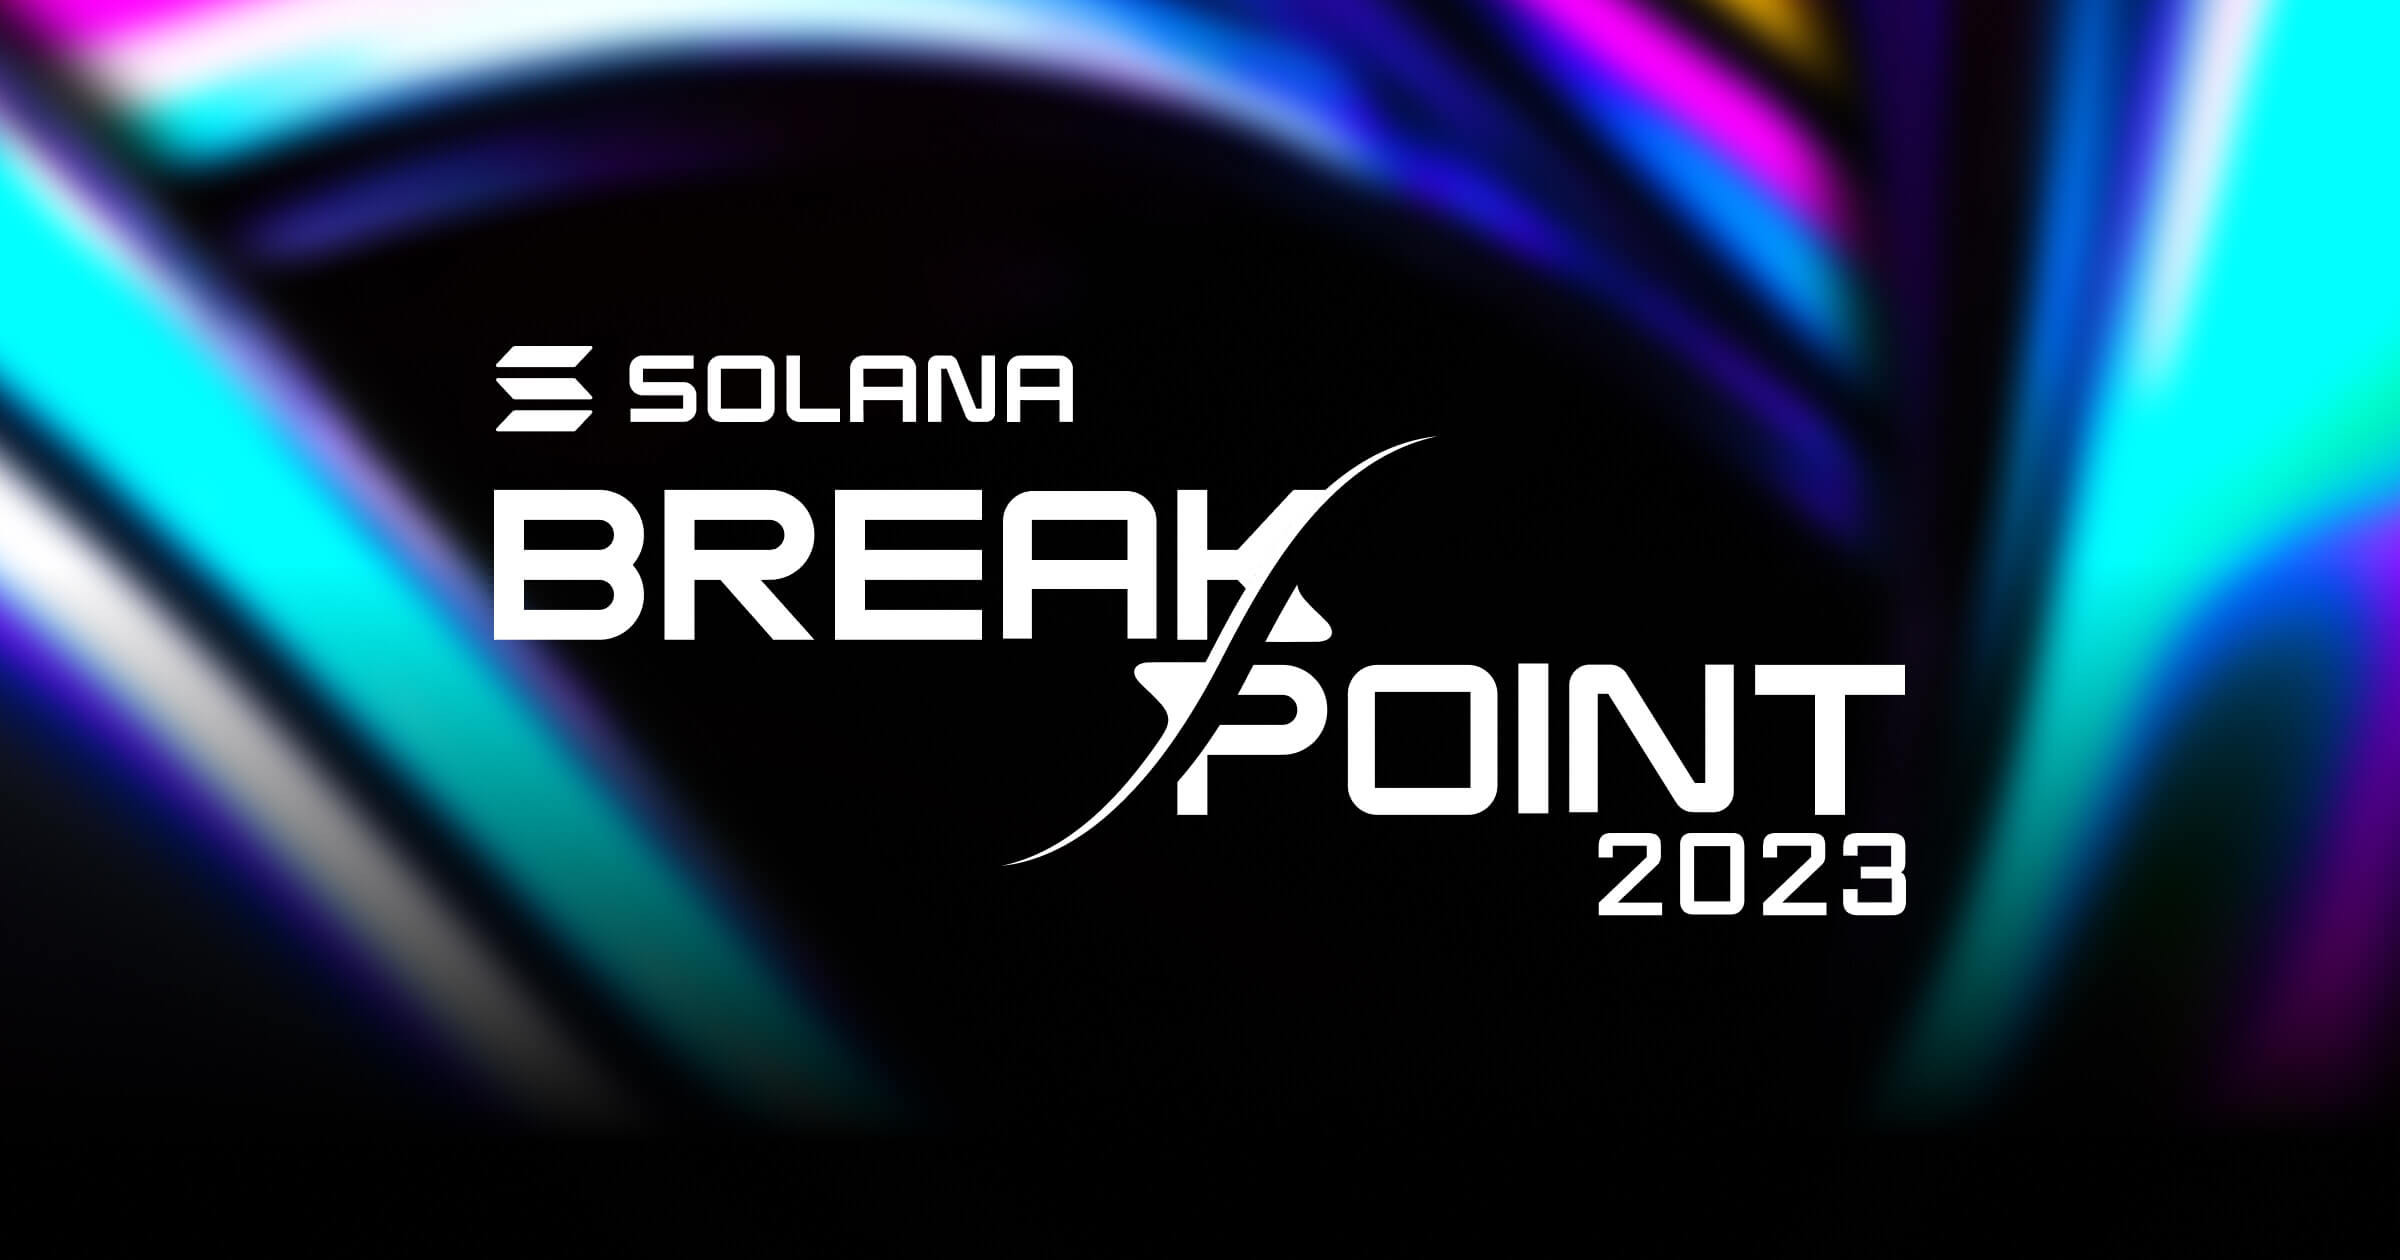 solana breakpoint 2023